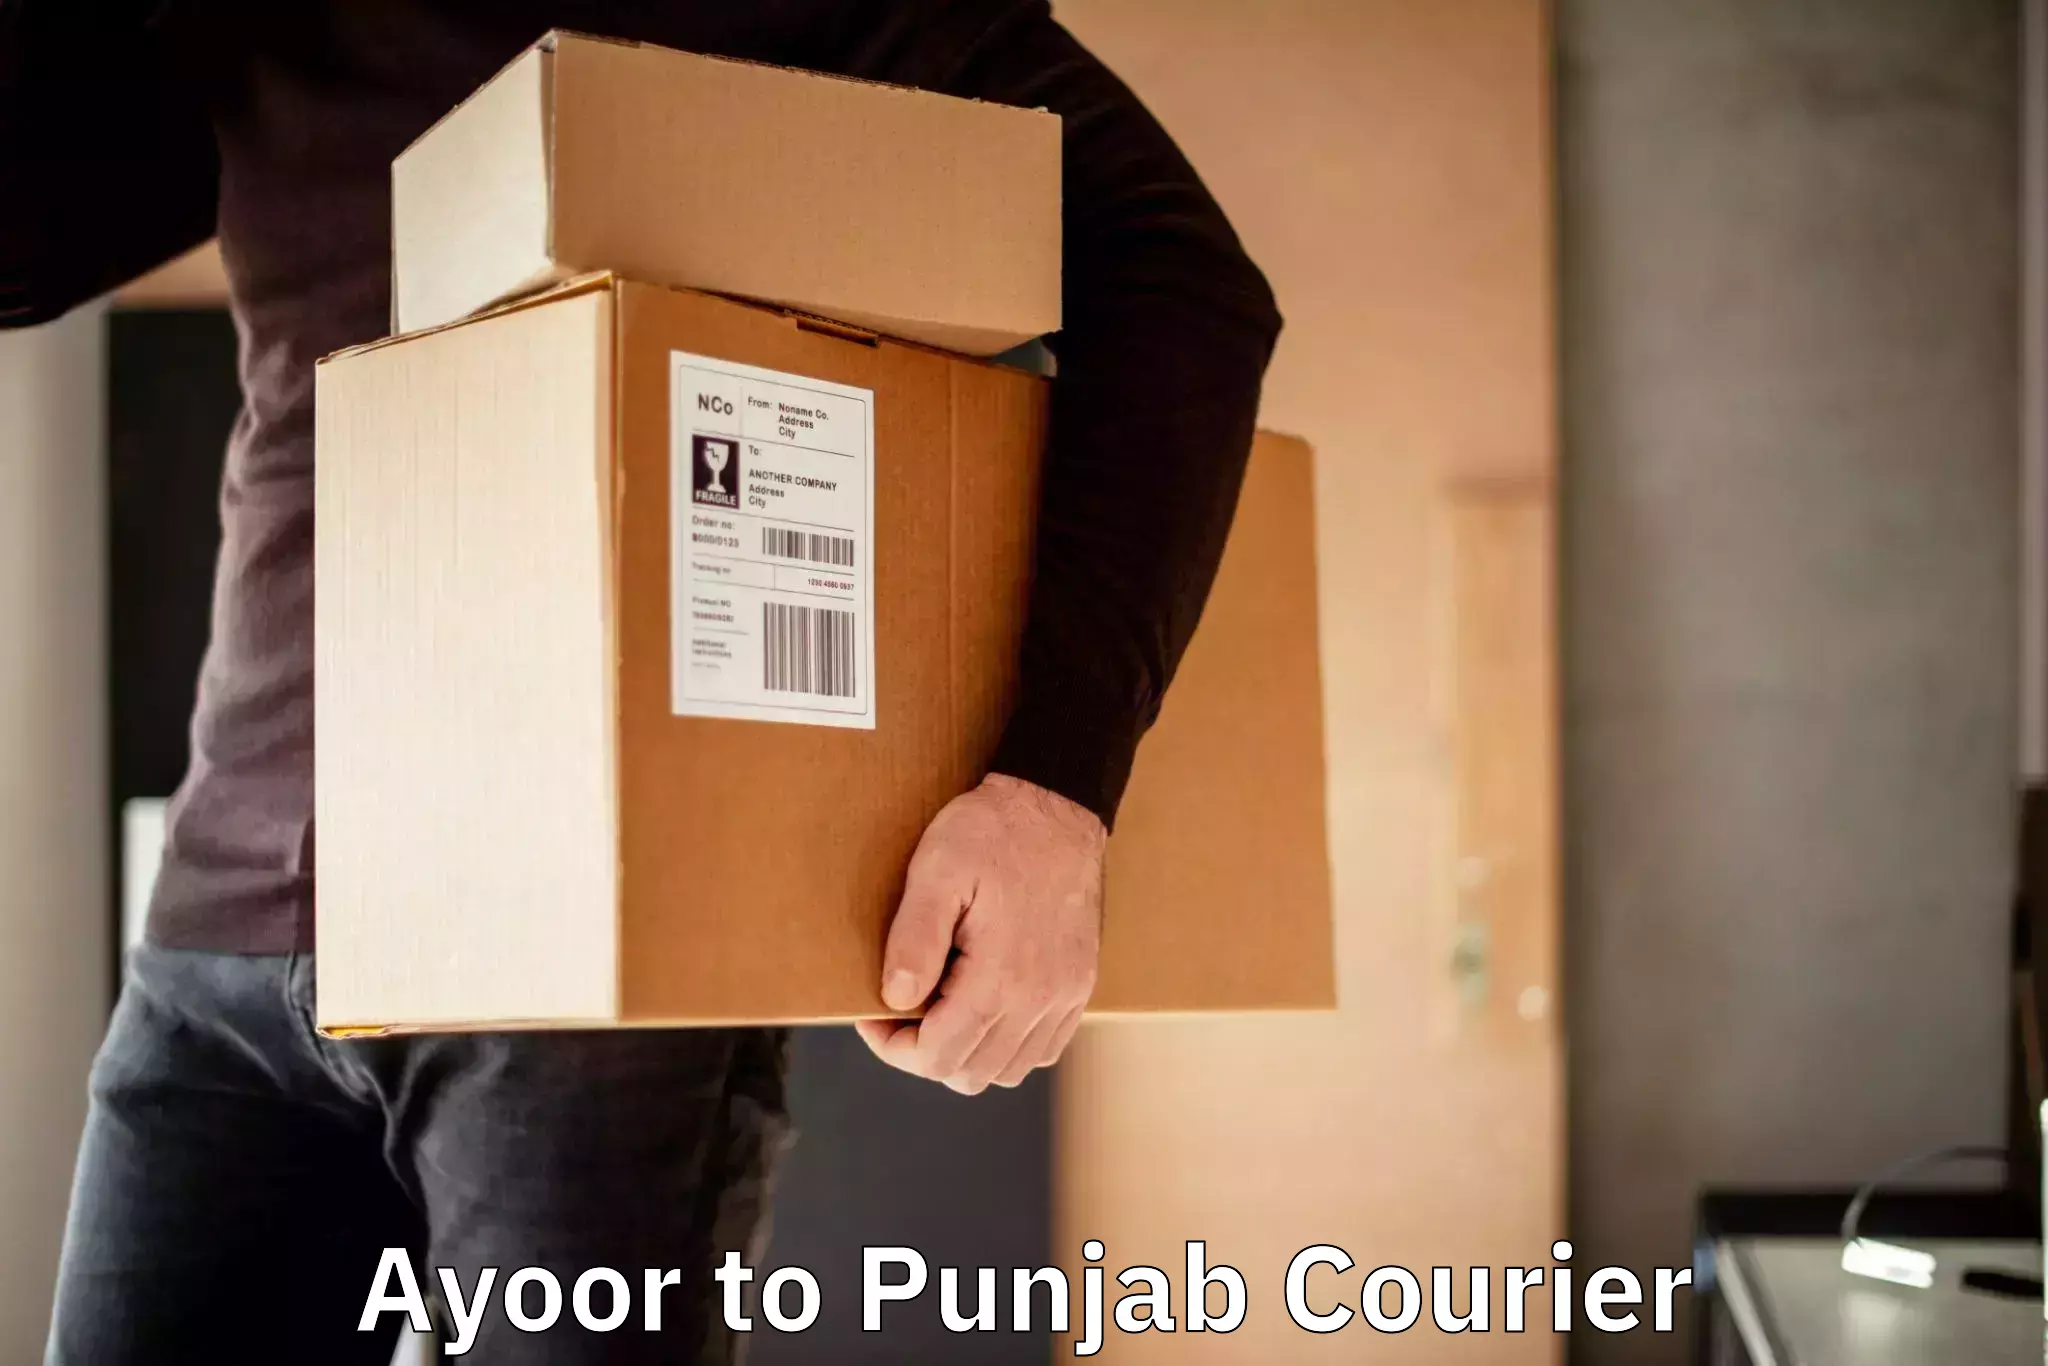 Next-day freight services Ayoor to Jalandhar